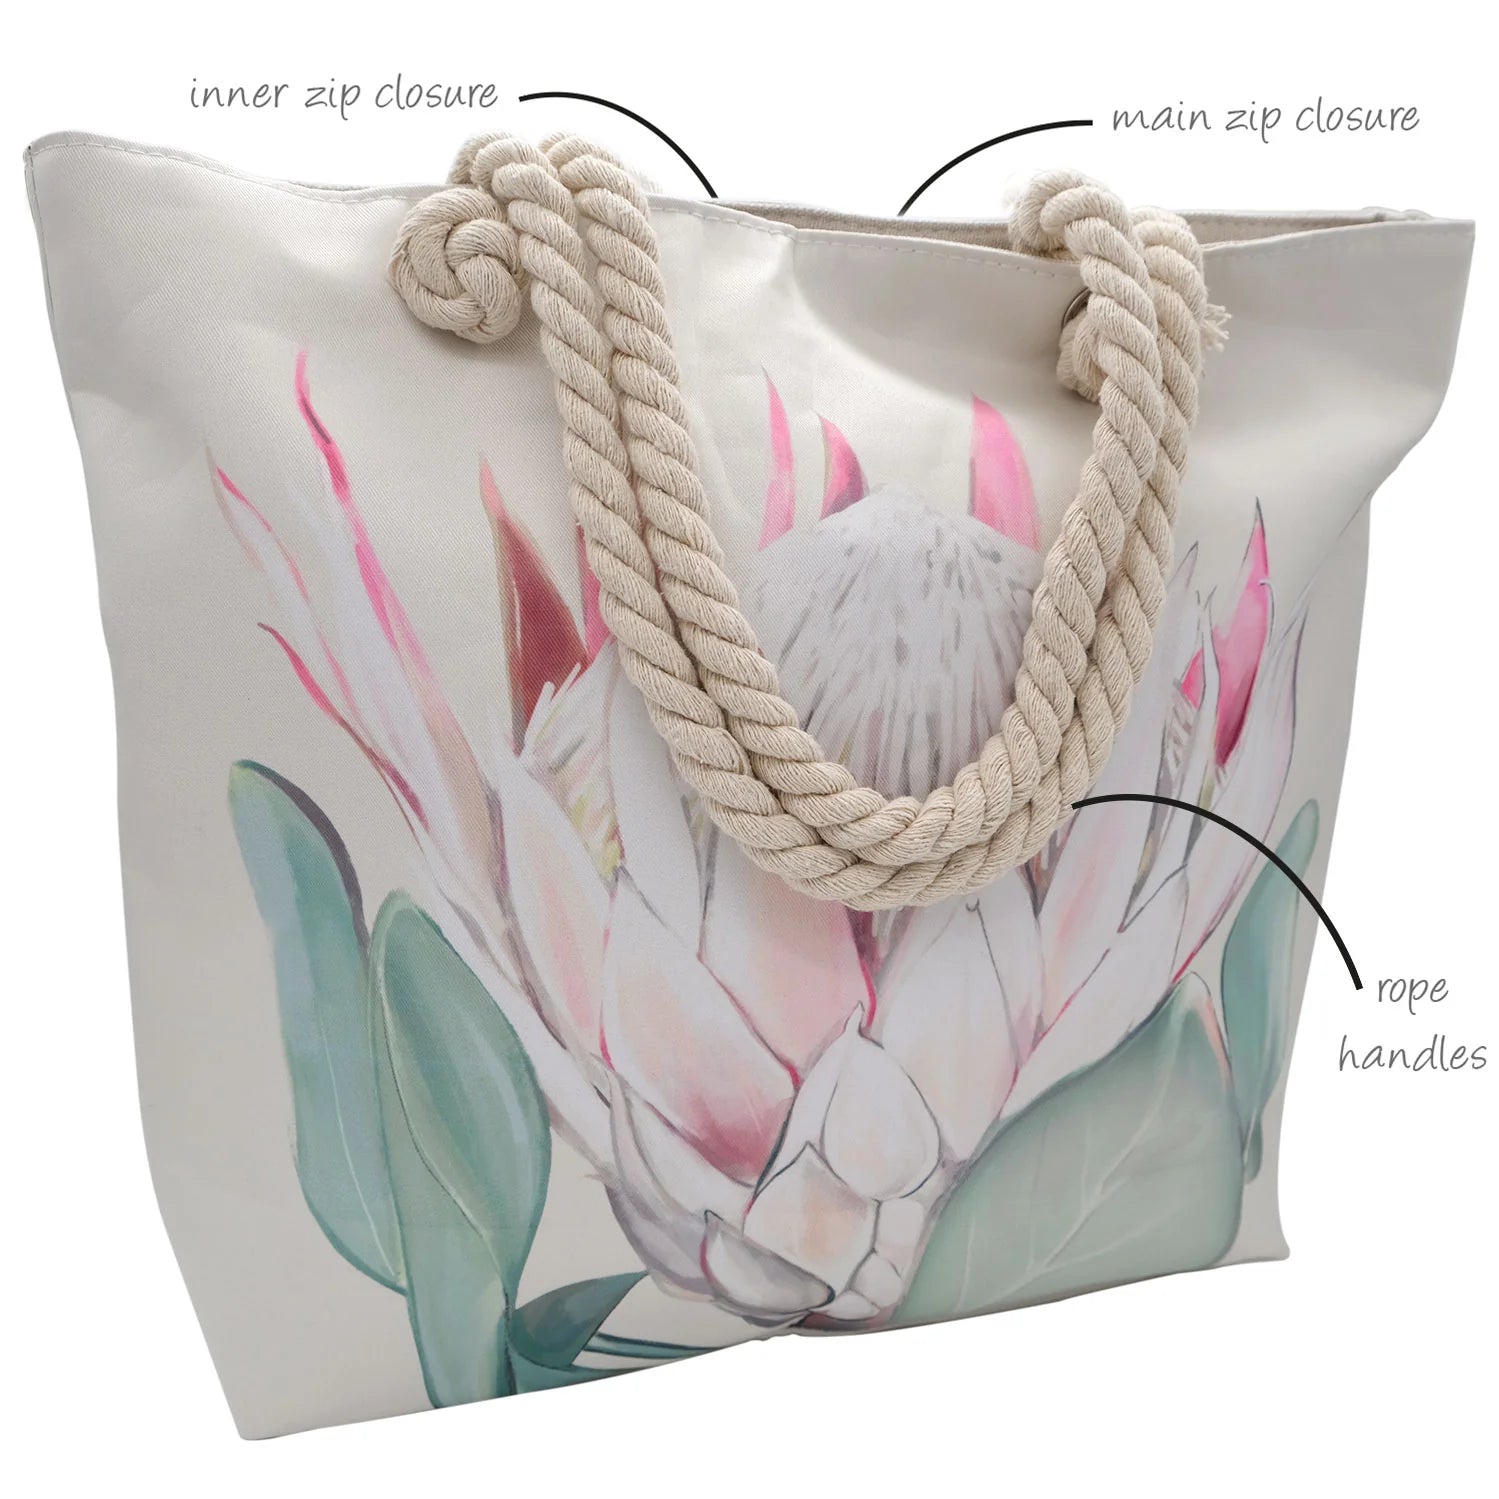 Protea Tote Bag with Rope Handles